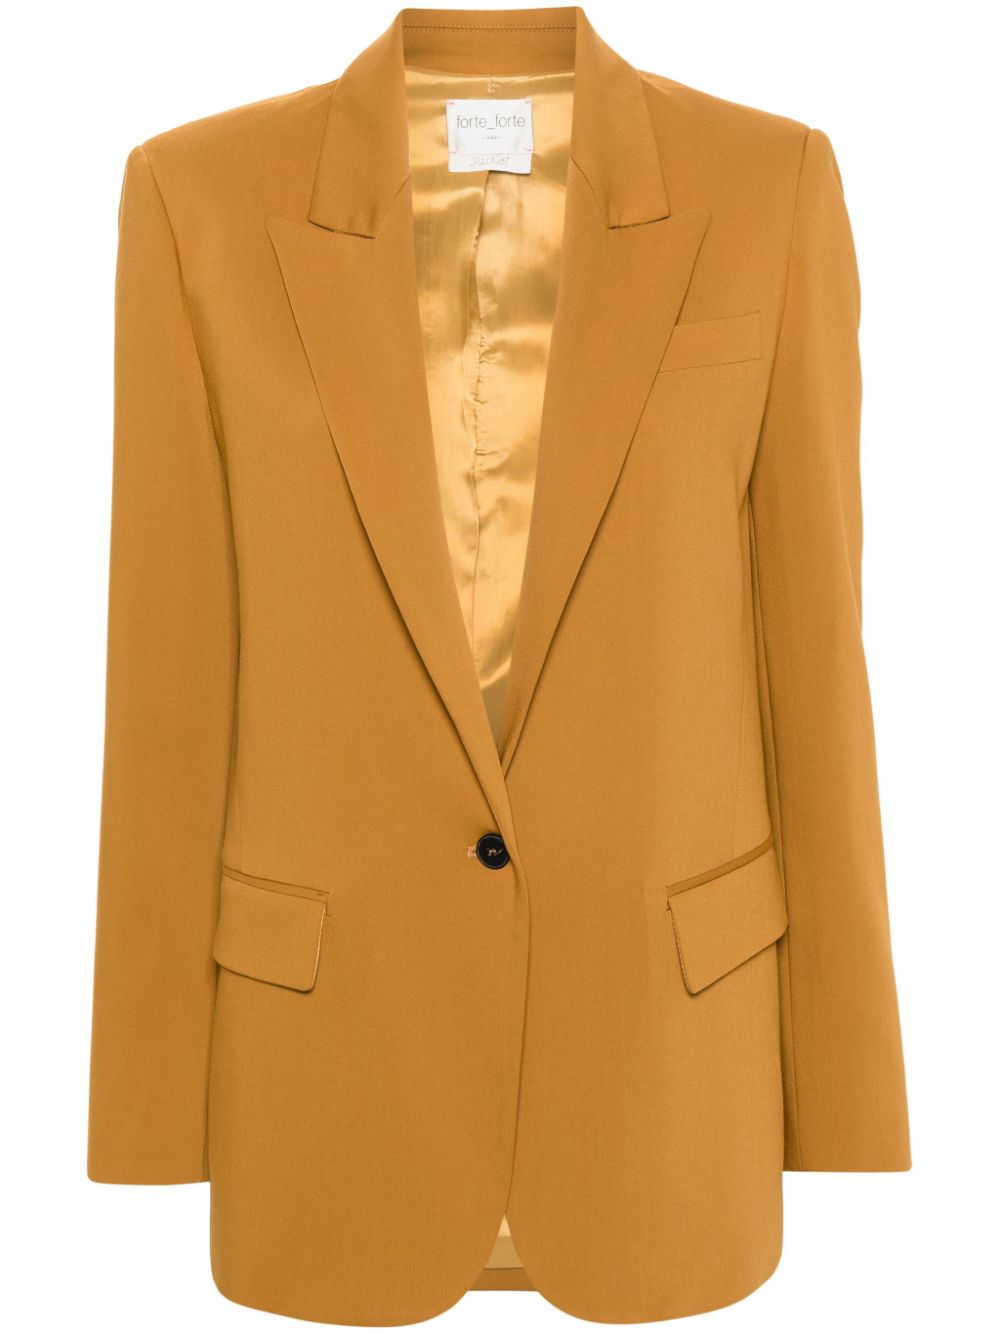 Forte Forte single-breasted notched-lapel blazer - Yellow von Forte Forte